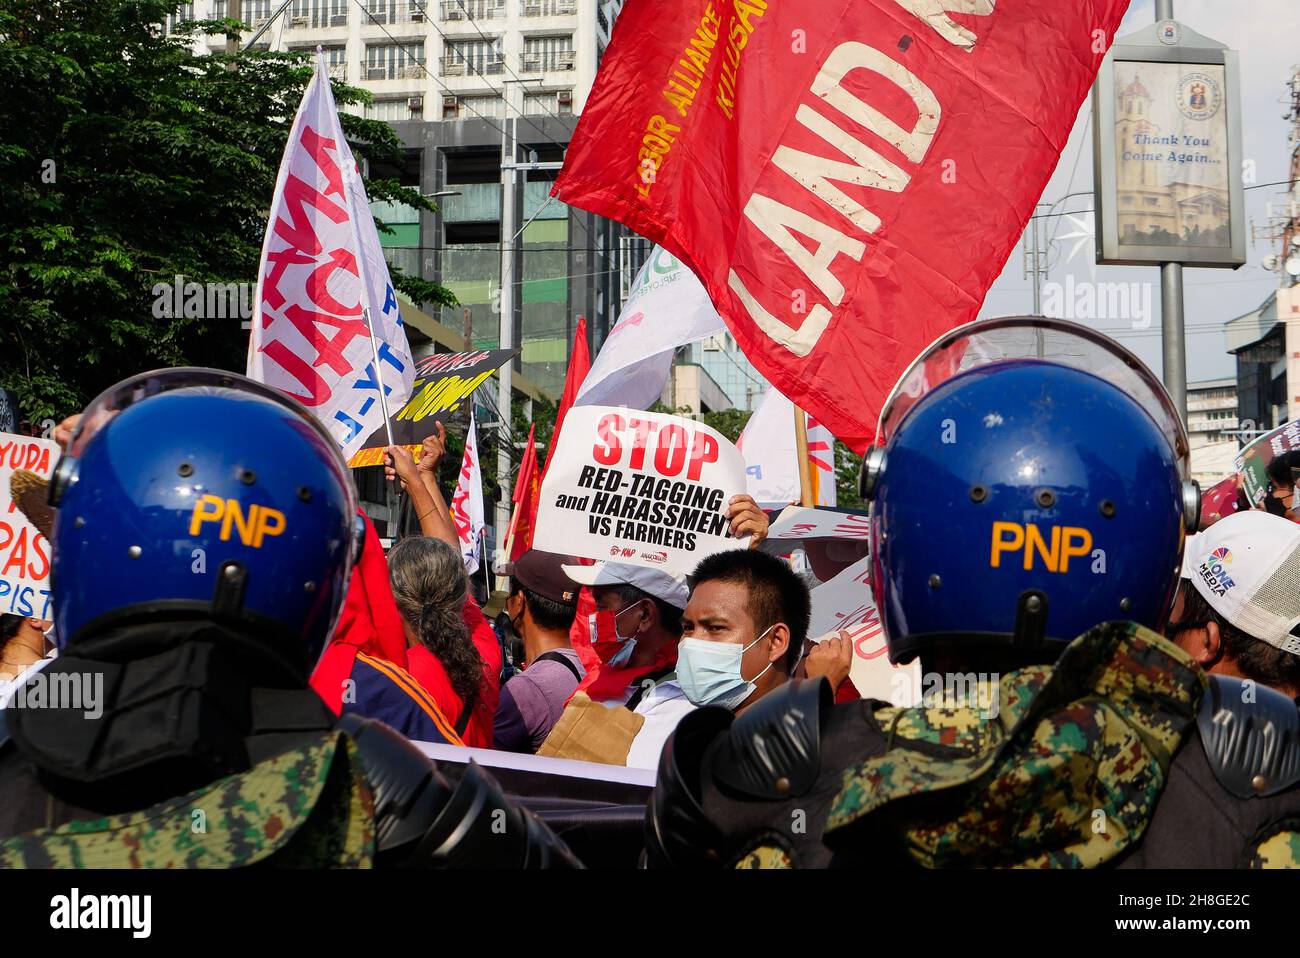 November 30, 2021, Manila City, National Capital Region, Philippines: Several labor workers gathered in groups at Welcome Rotonda at EspaÃÂ±a blvd. The labor workers will march in protest in honor of Andres Bonifacio, a national hero and father of the Philippine revolution. It is in this Andres Bonifacio Day that they'll march towards Mendiola but blocked by the police. The protest march is held to highlight key issues for a safe work place, stop red-tagging poor sector groups, their rights as workers, and freedom from the Duterte's corrupt administration. (Credit Image: © George Buid/ZUMA Pr Stock Photo